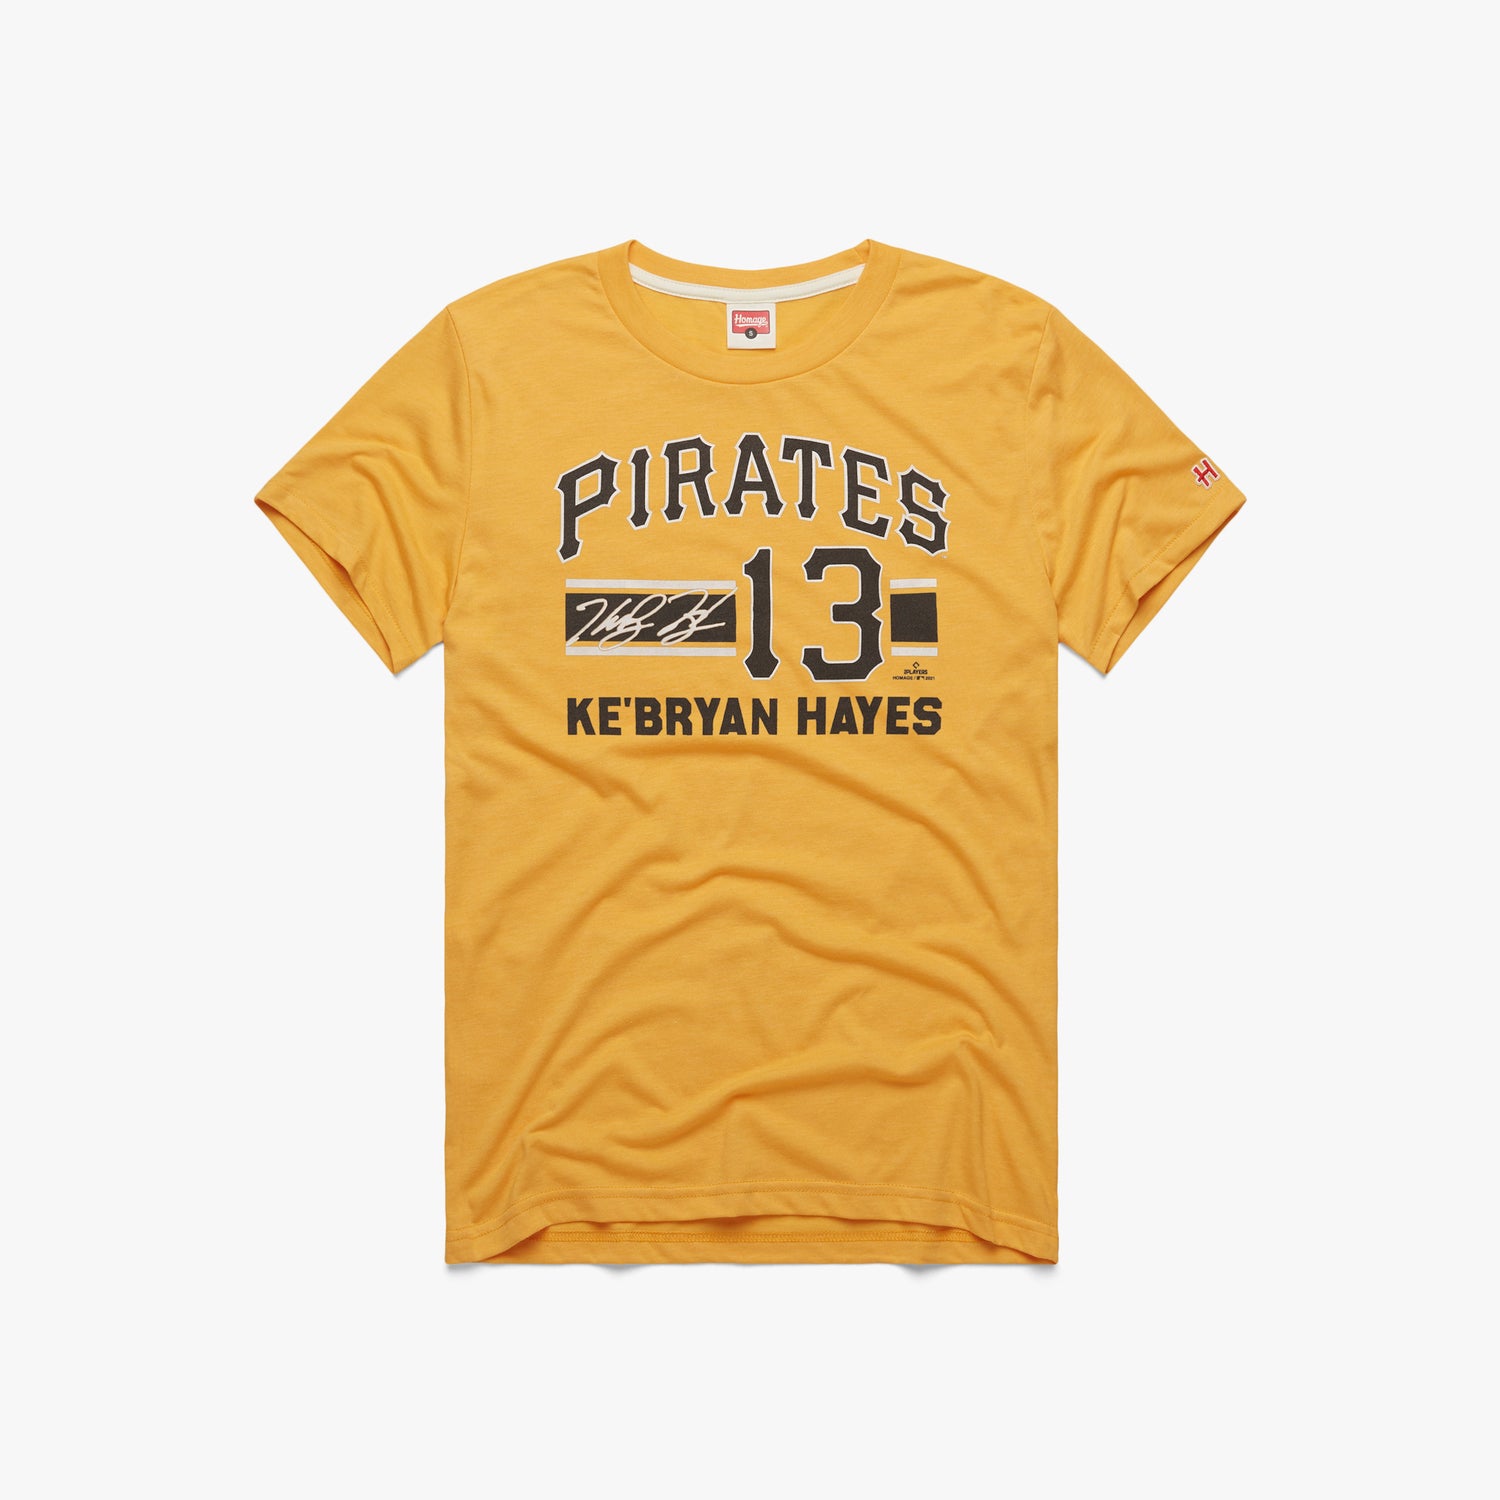 Pirates Ke'Bryan Hayes Signature Jersey T-Shirt from Homage. | Gold | Vintage Apparel from Homage.